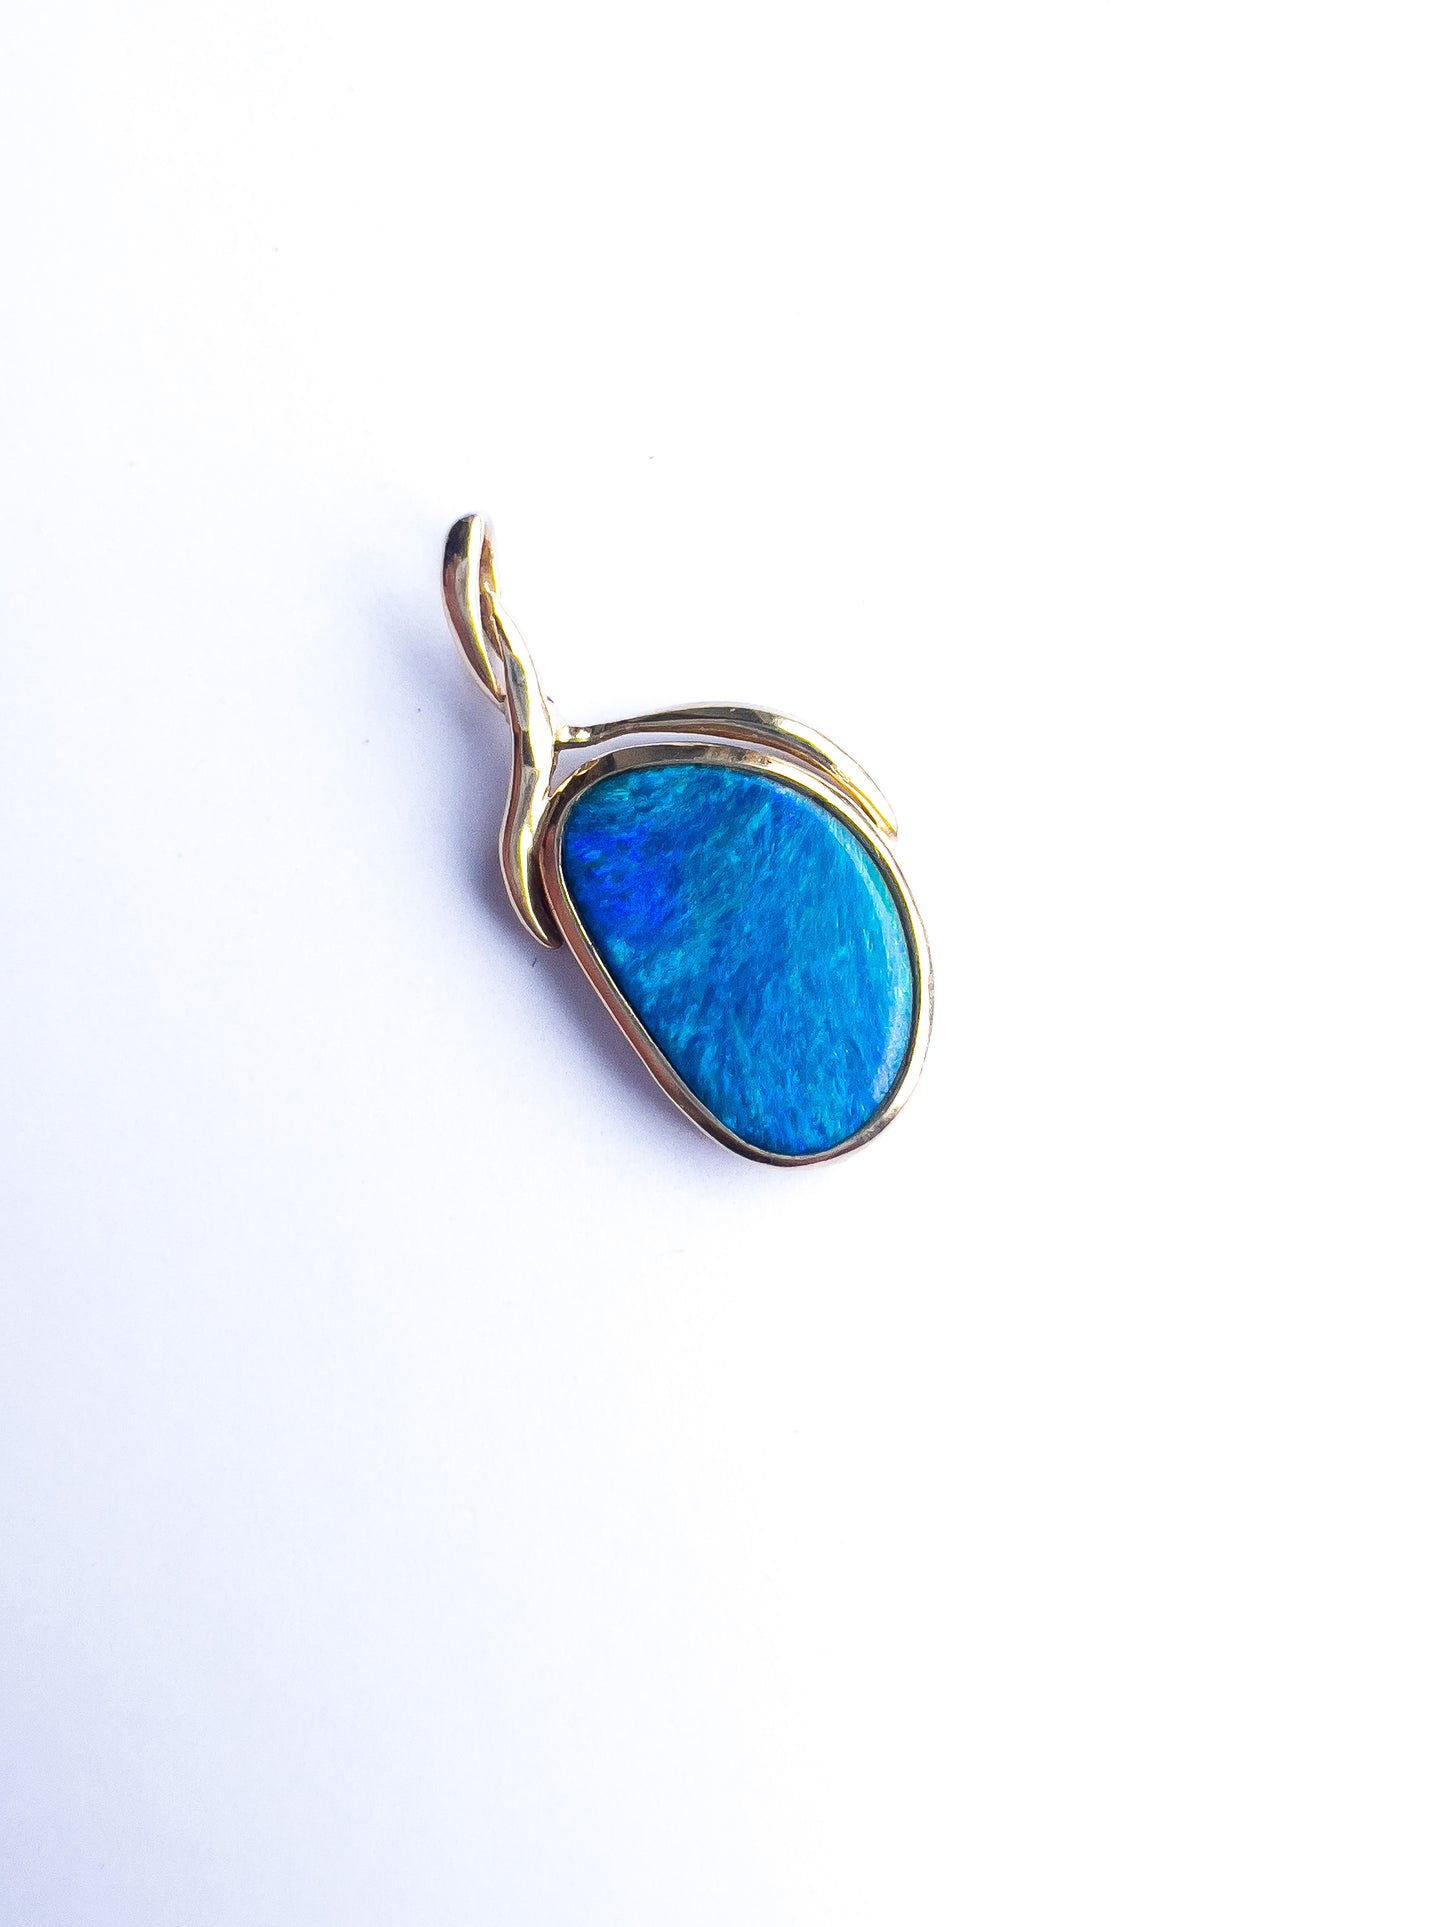 14k Yellow gold and Blue Opal pendant